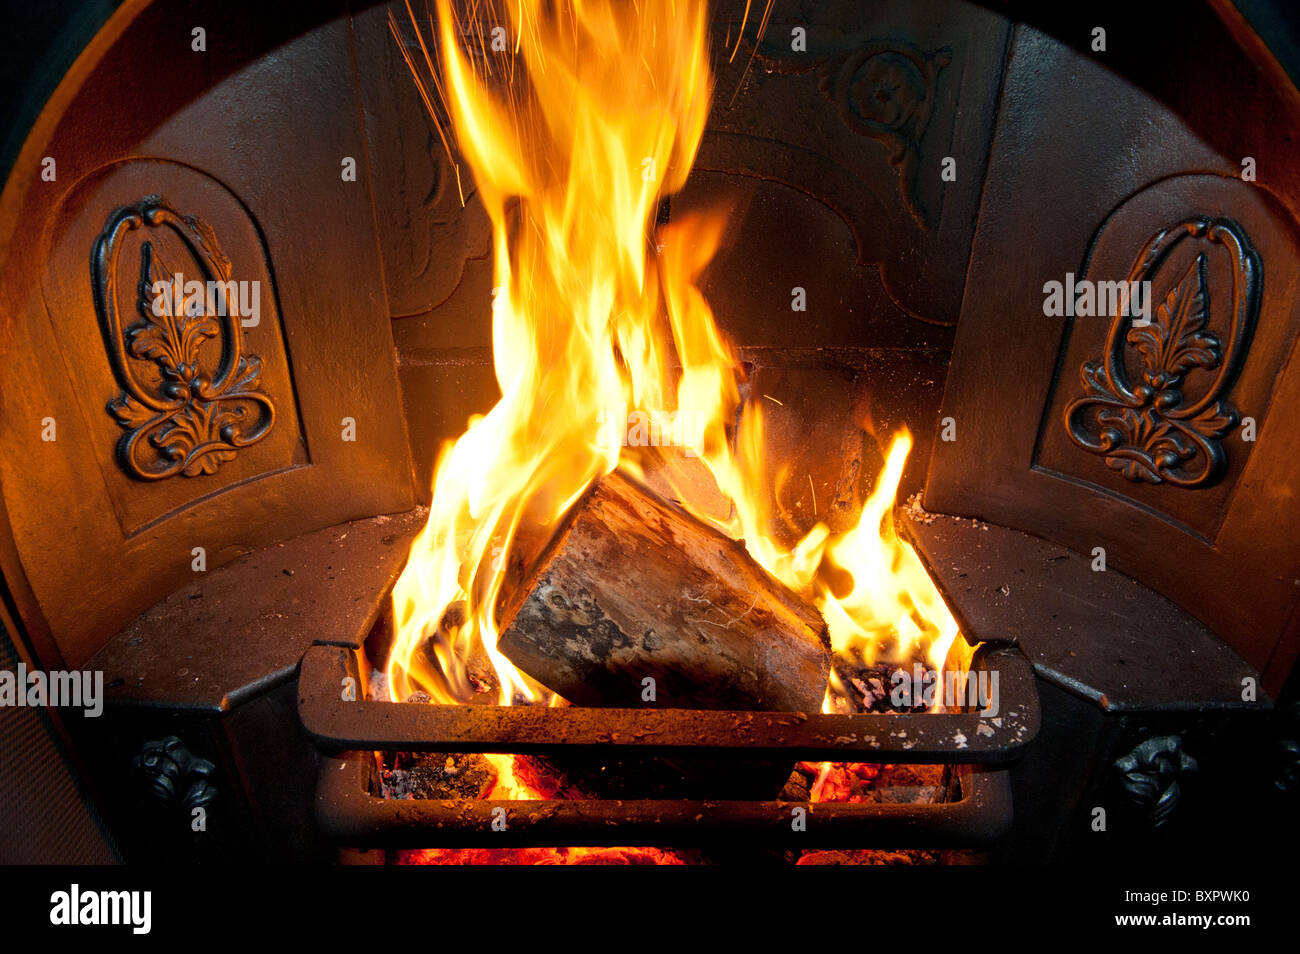 Logs burning brightly in an ornate Victorian or Edwardian fireplace hearth Stock Photo